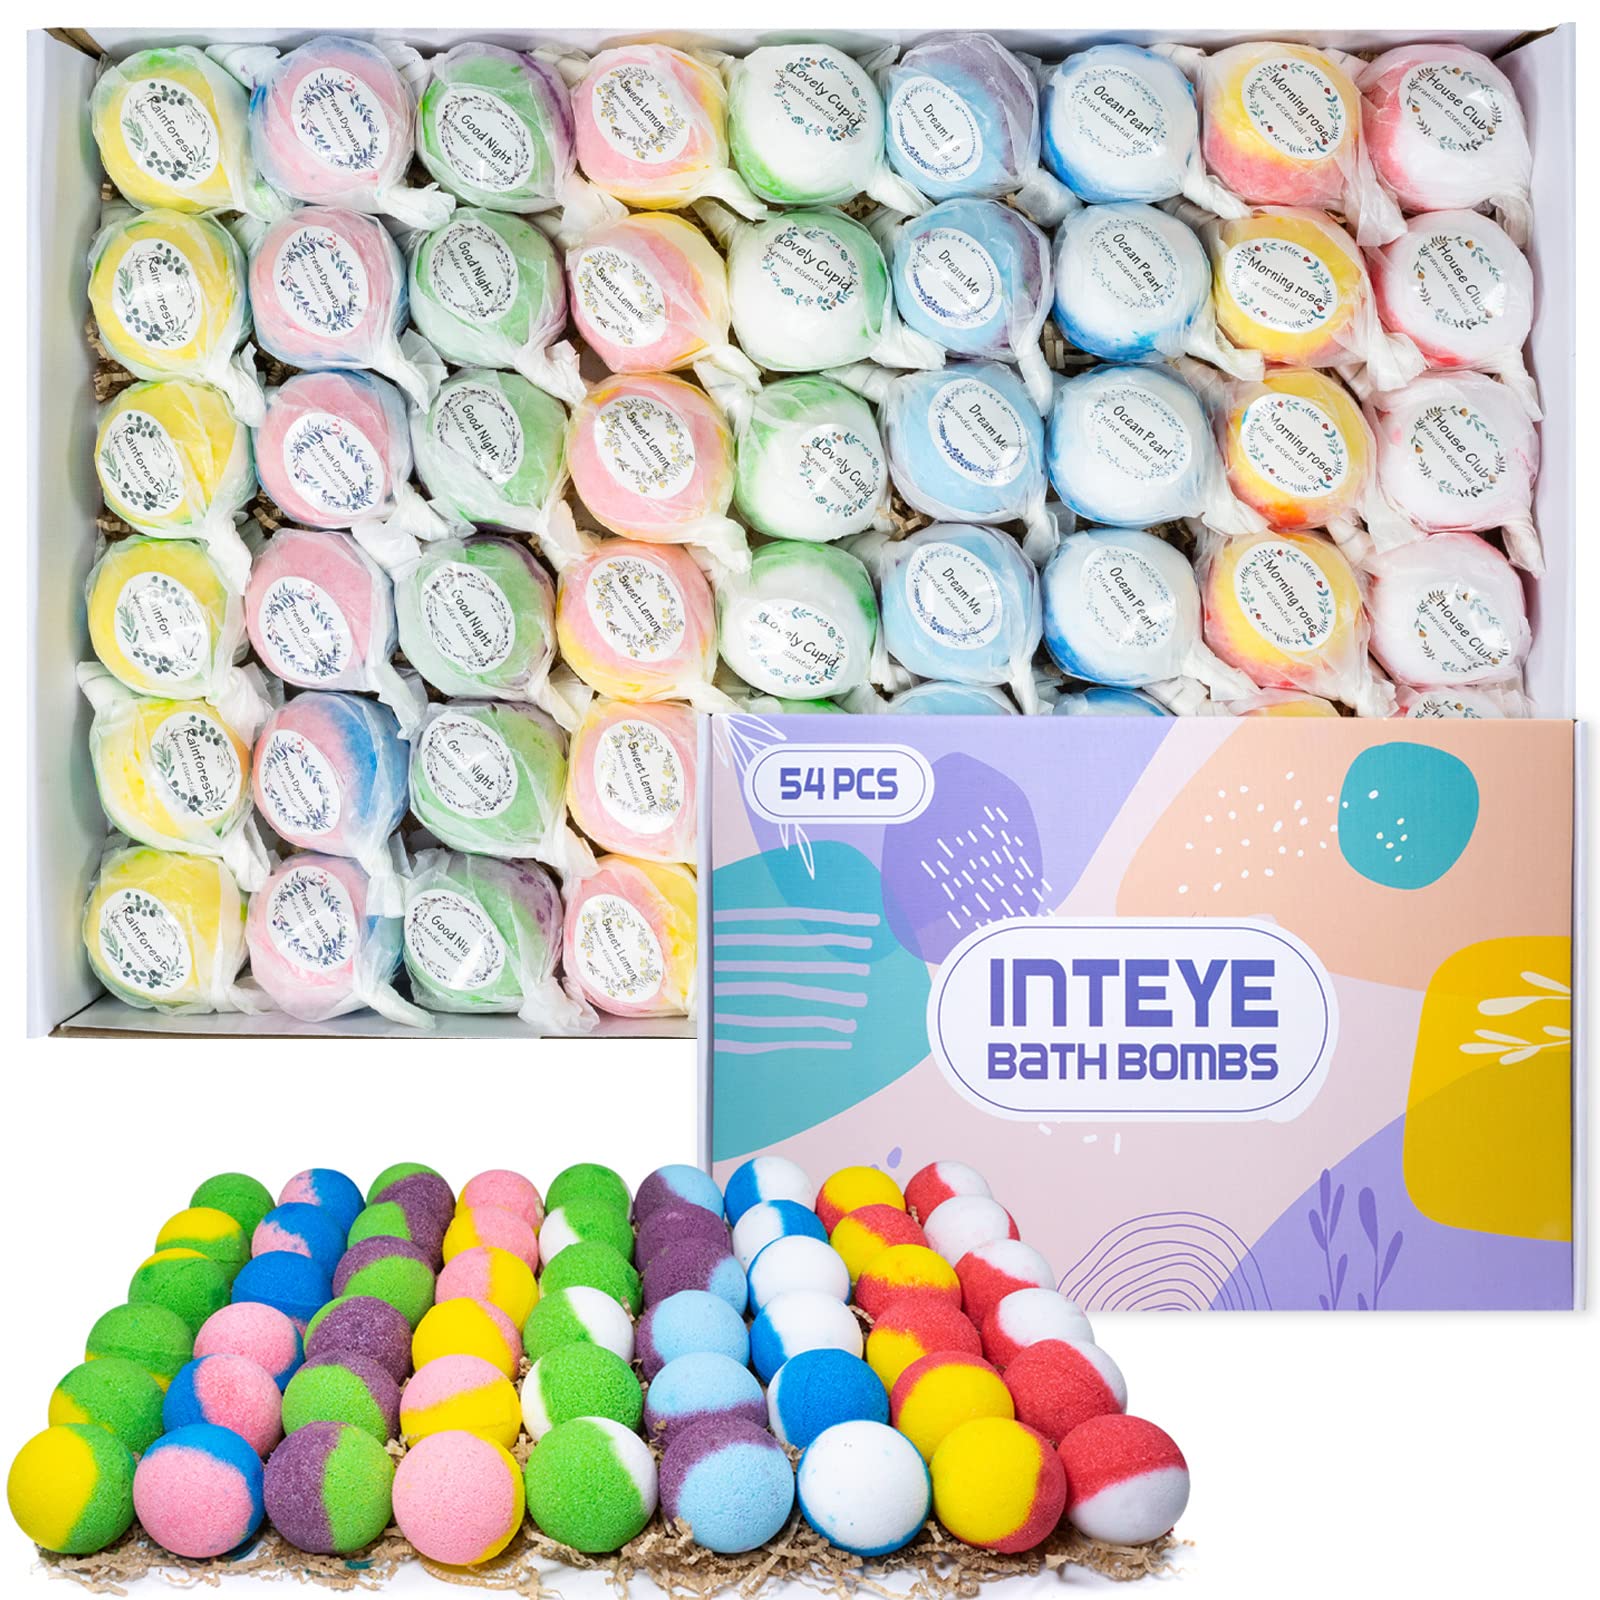 INTEYE 54 PCS Bulk Bath Bombs with Small Gift Bags, Bubble Bath Shower Salts for Women, Men & Kids, Relaxation and Stress Relief…